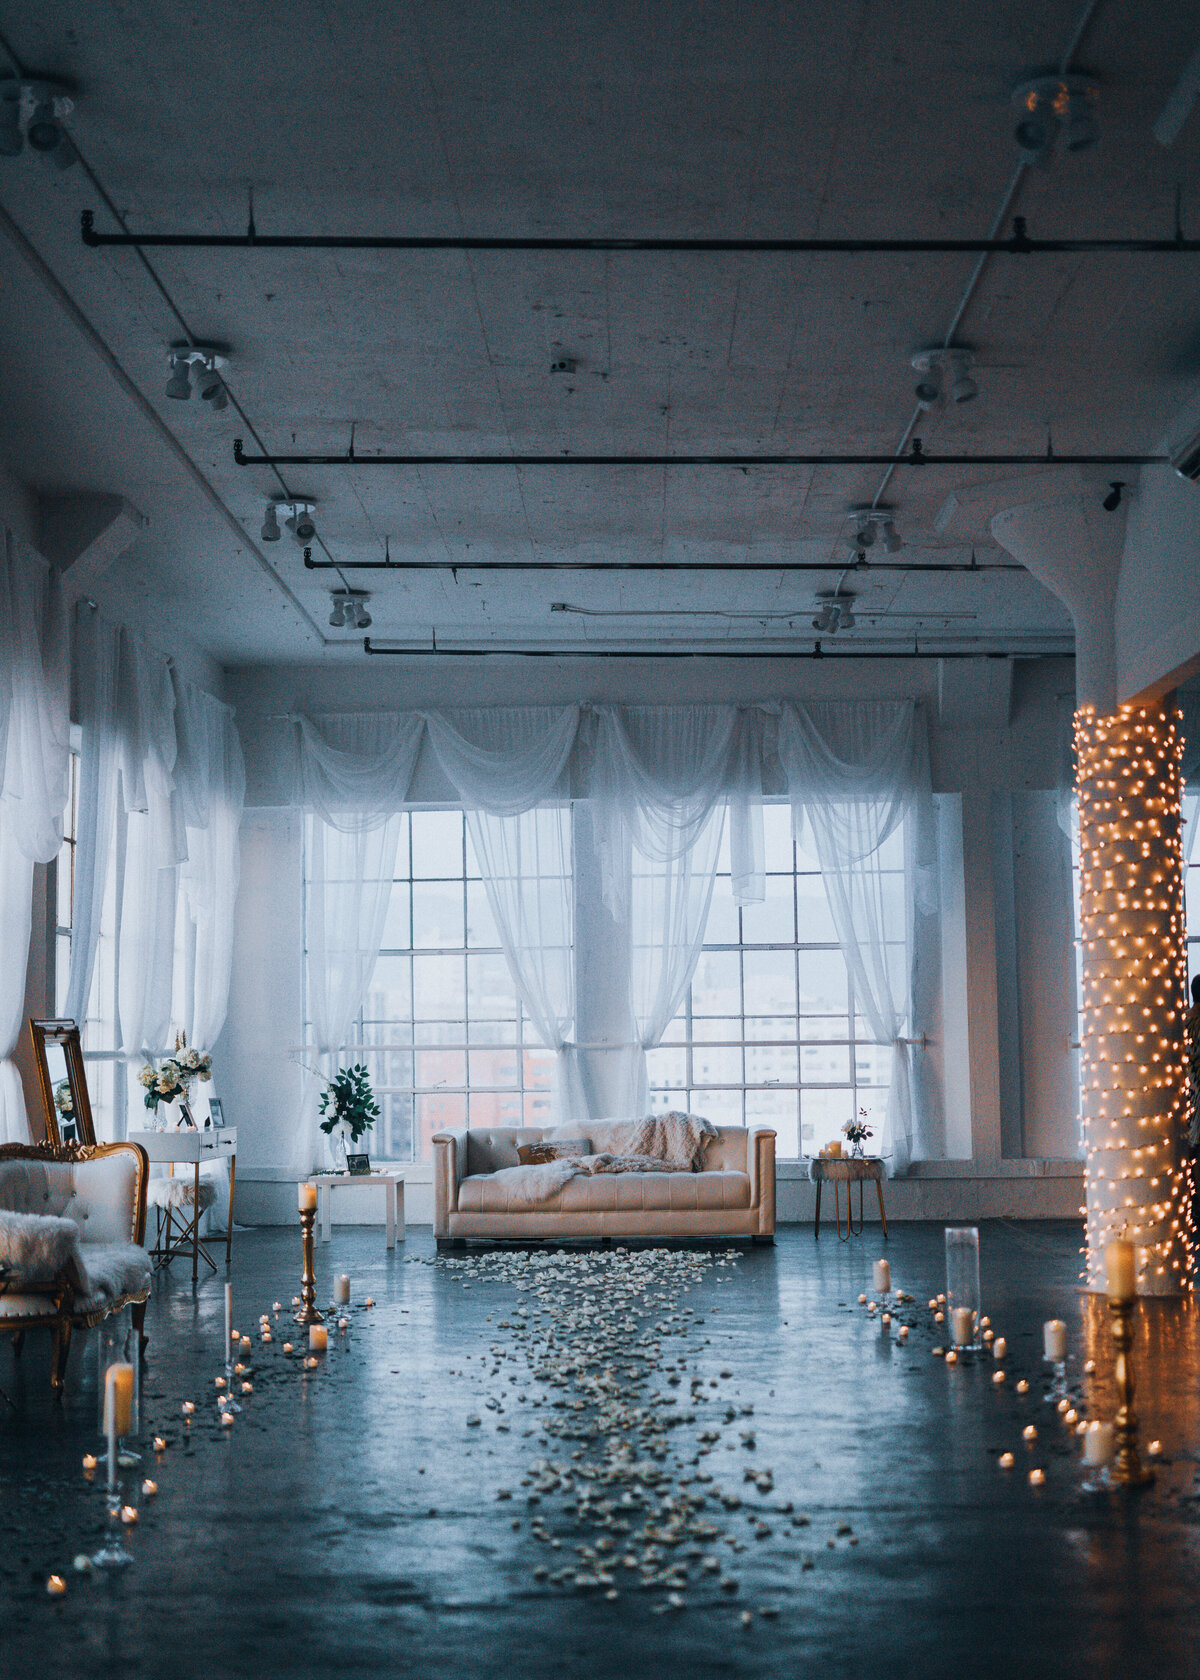 A warehouse loft apartment is set for a wedding proposal with rose petals, candles and fairy lights.